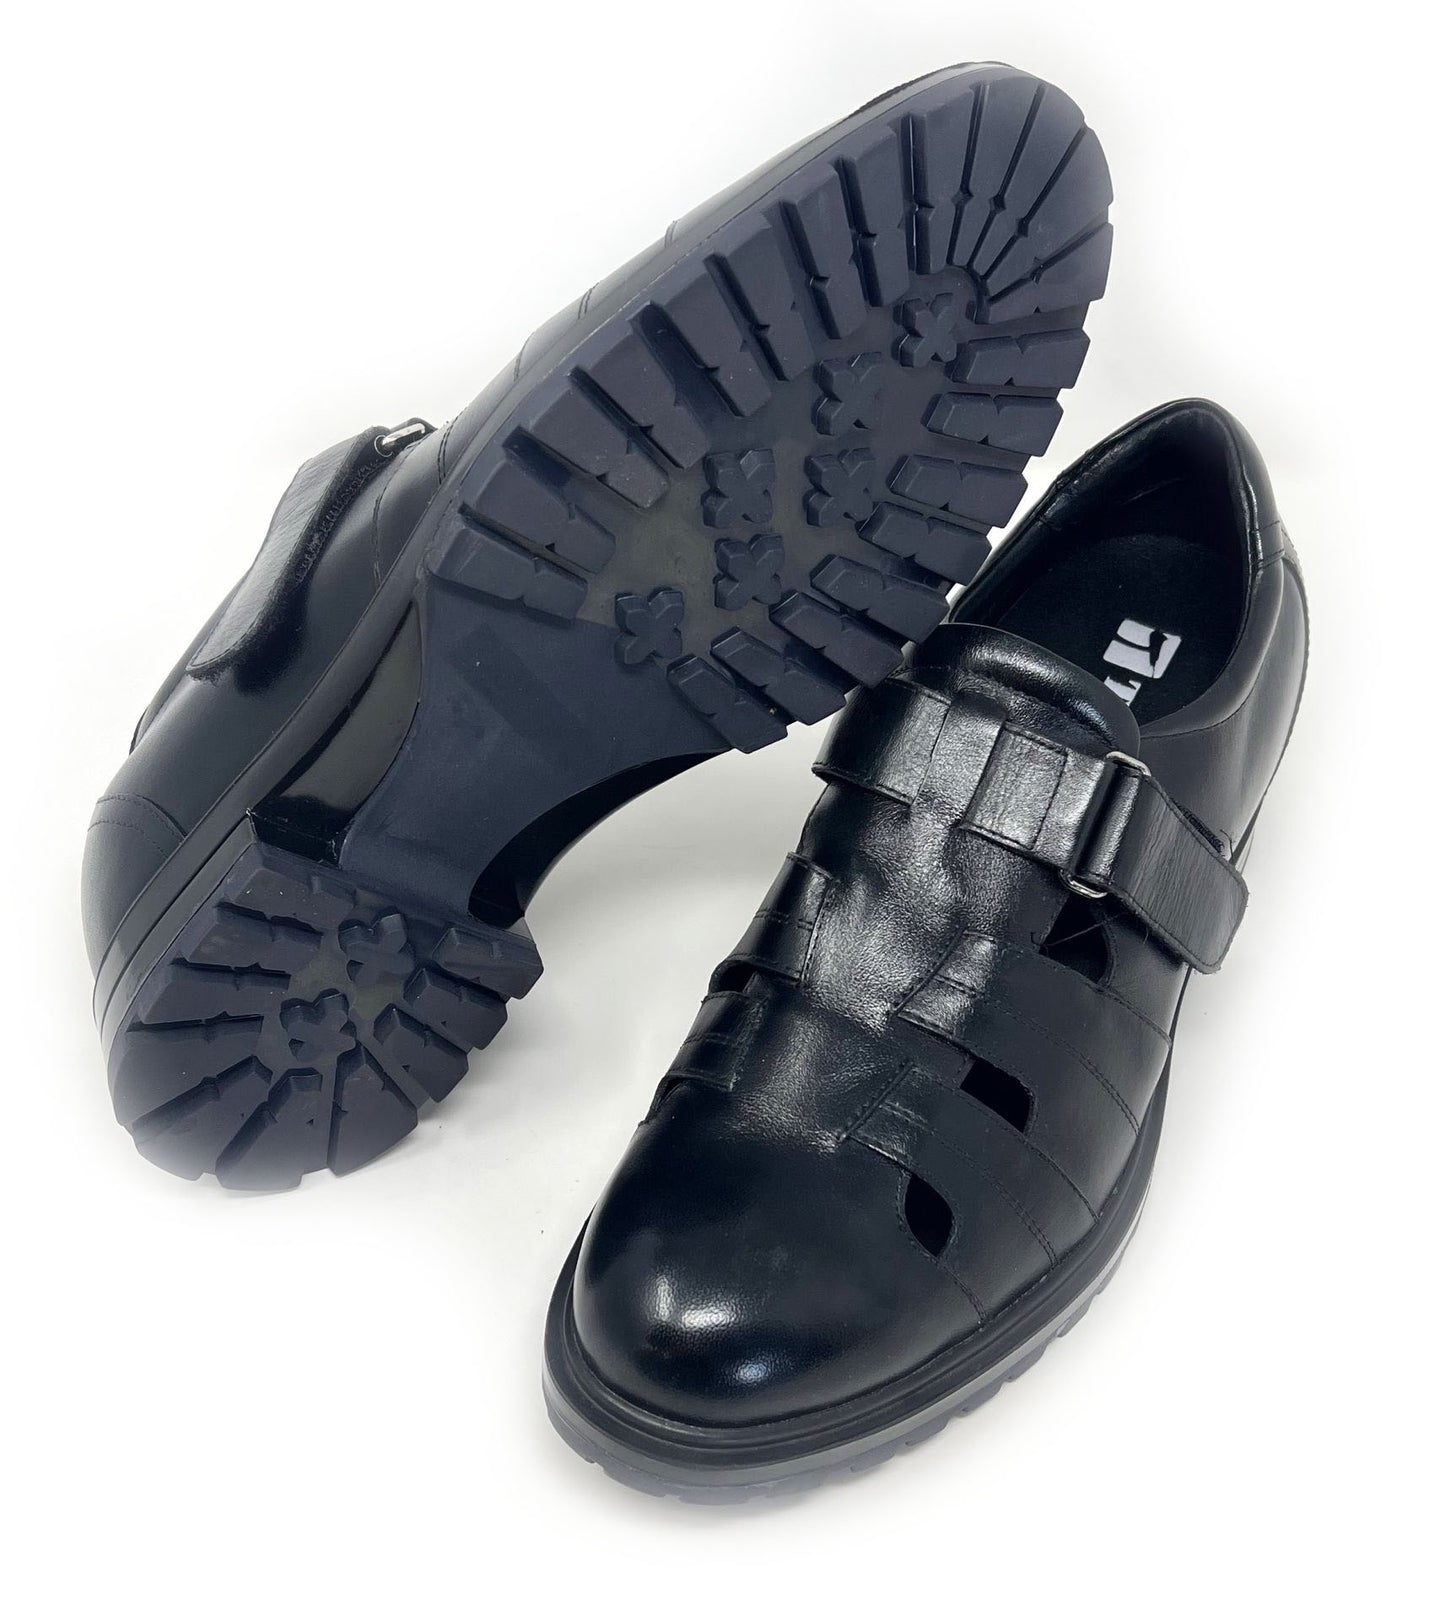 Elevator shoes height increase FSF0096 - 3 Inches Taller (Black) - Size 7.5 Only